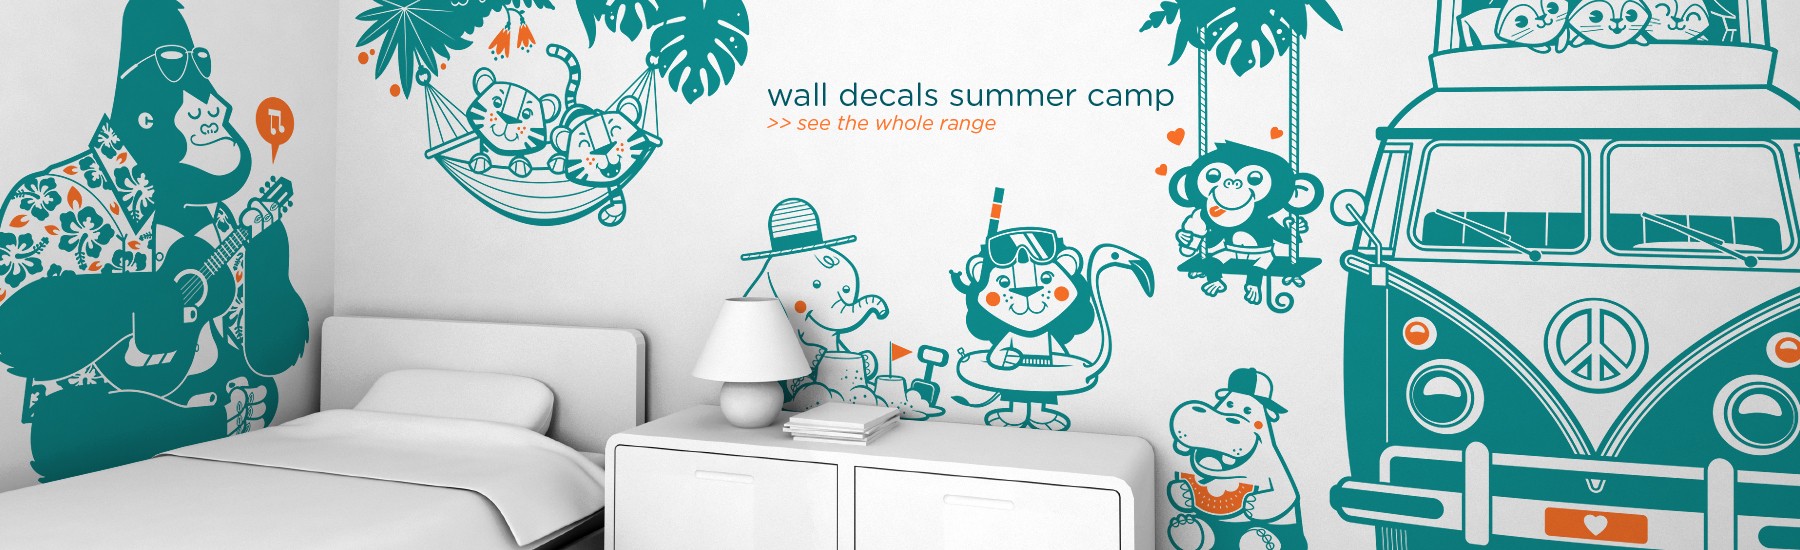 animal wall decals summer camp